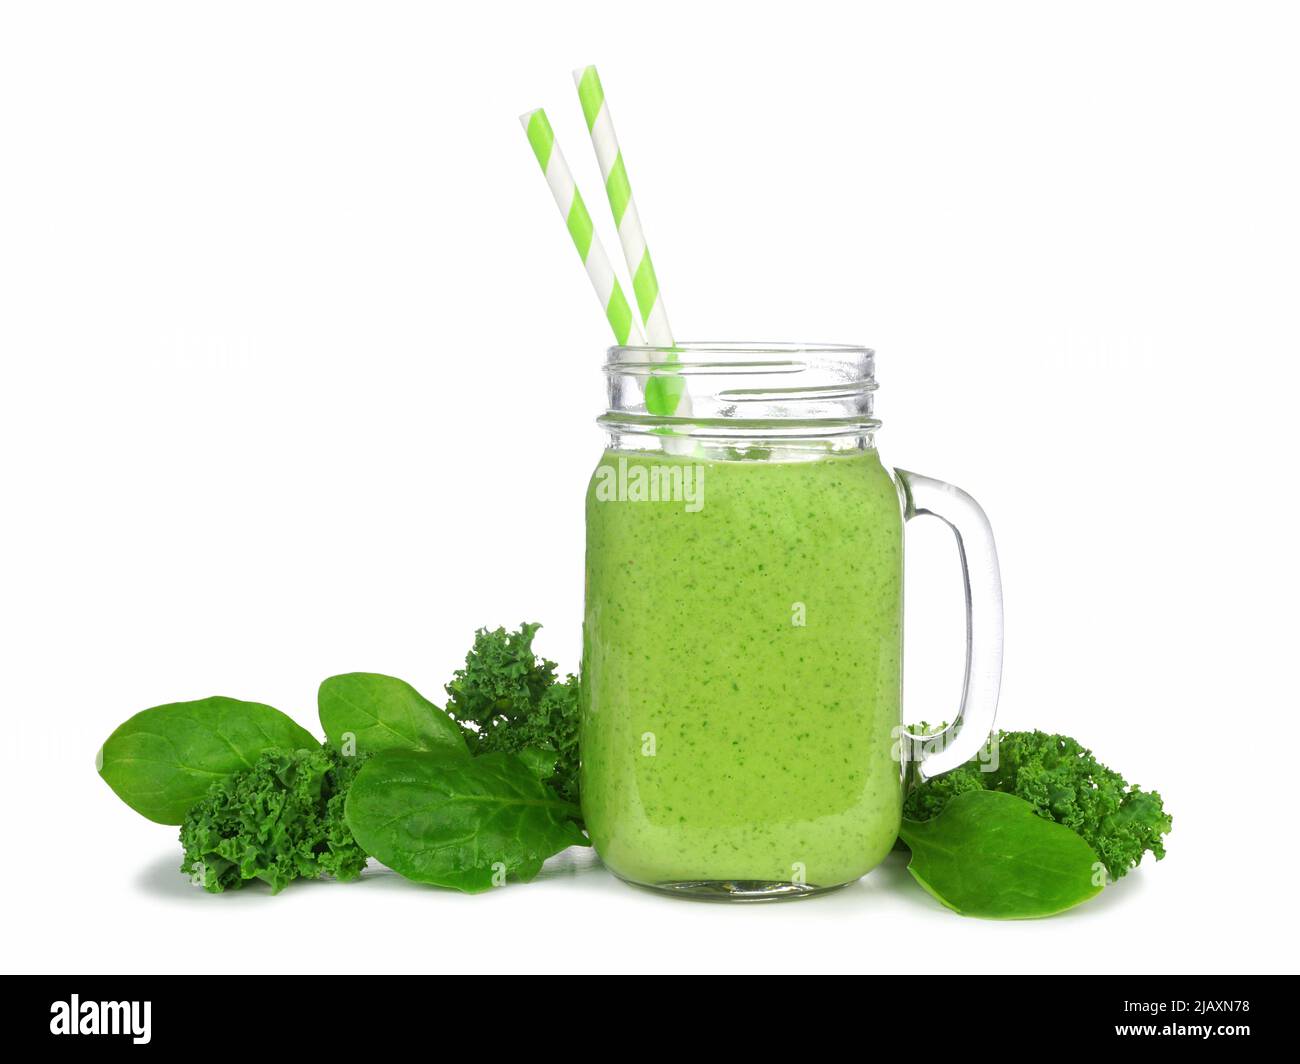 Green smoothie with kale and spinach in a mason jar glass. Side view with ingredients isolated on a white background. Stock Photo